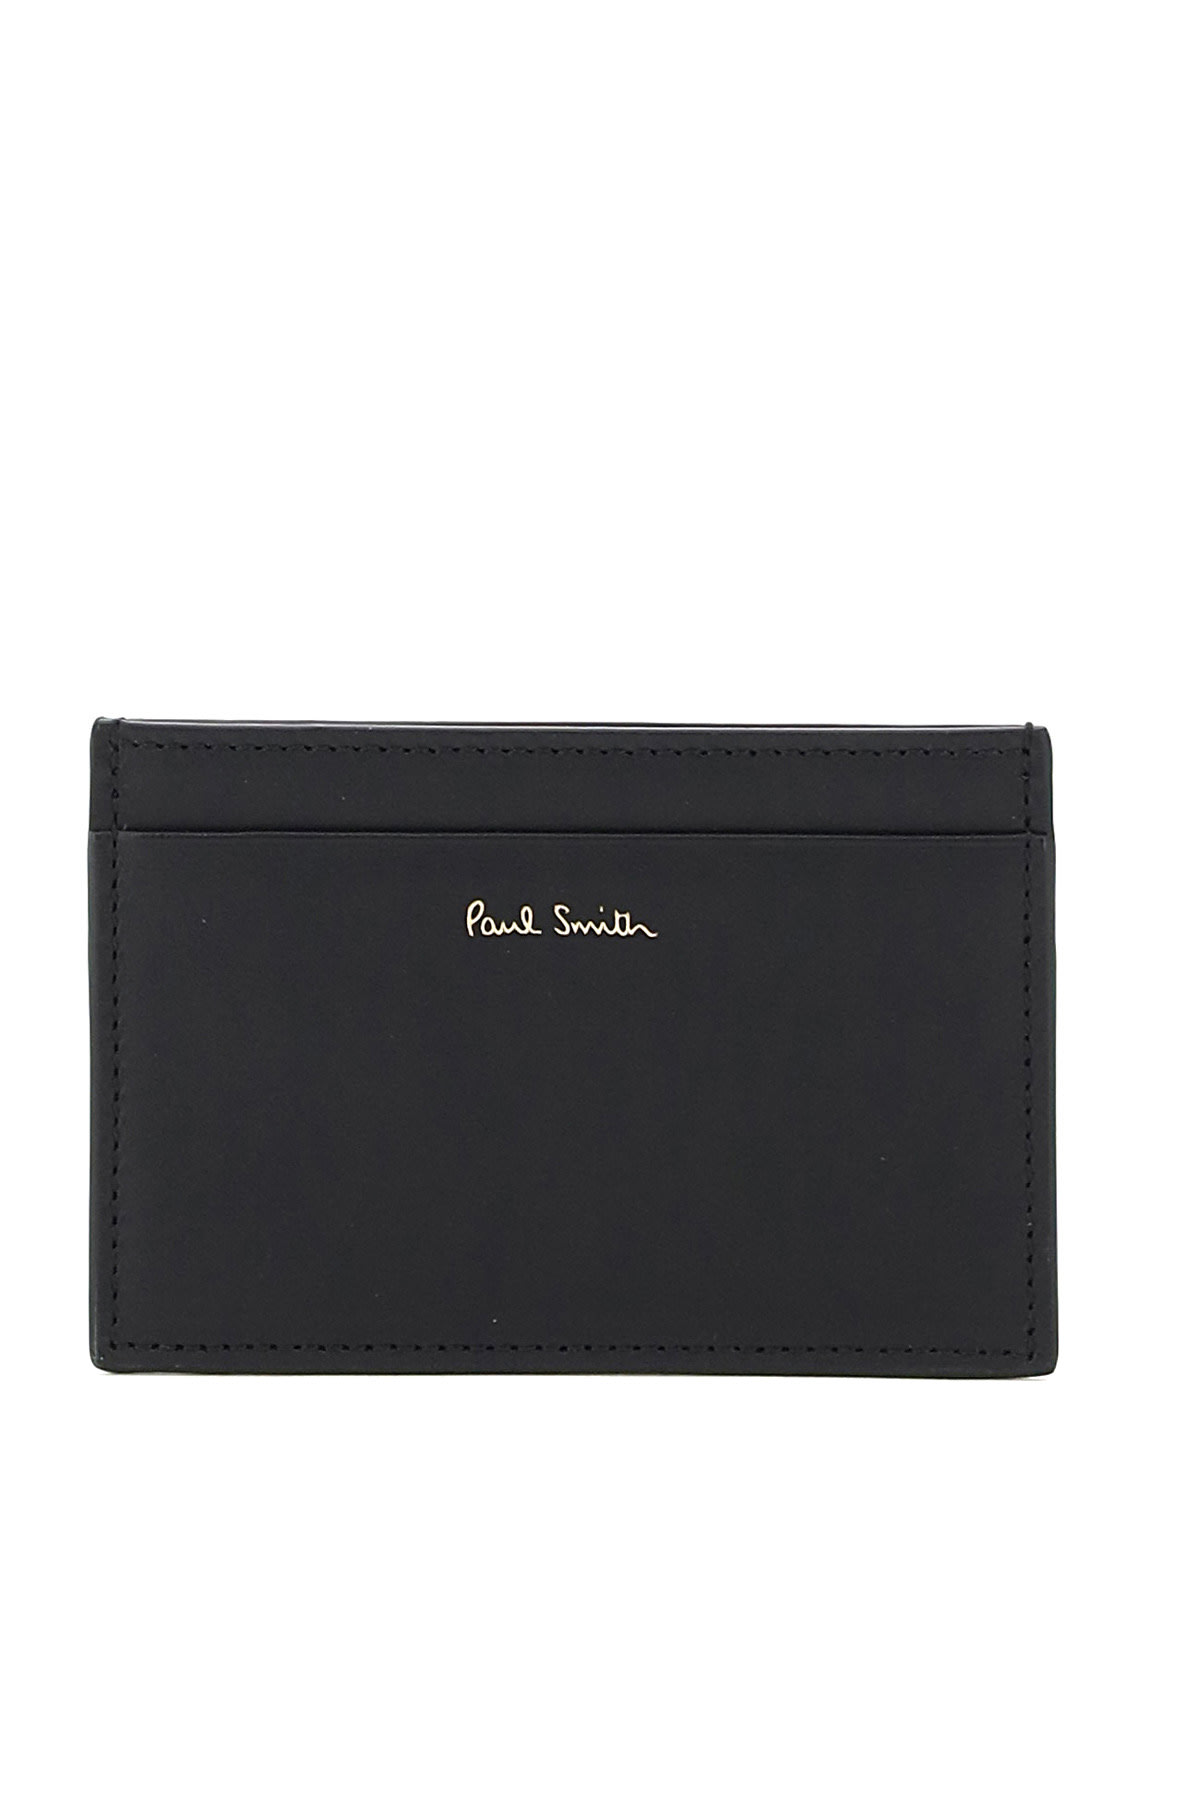 Paul Smith Striped Card Holder In Black/red